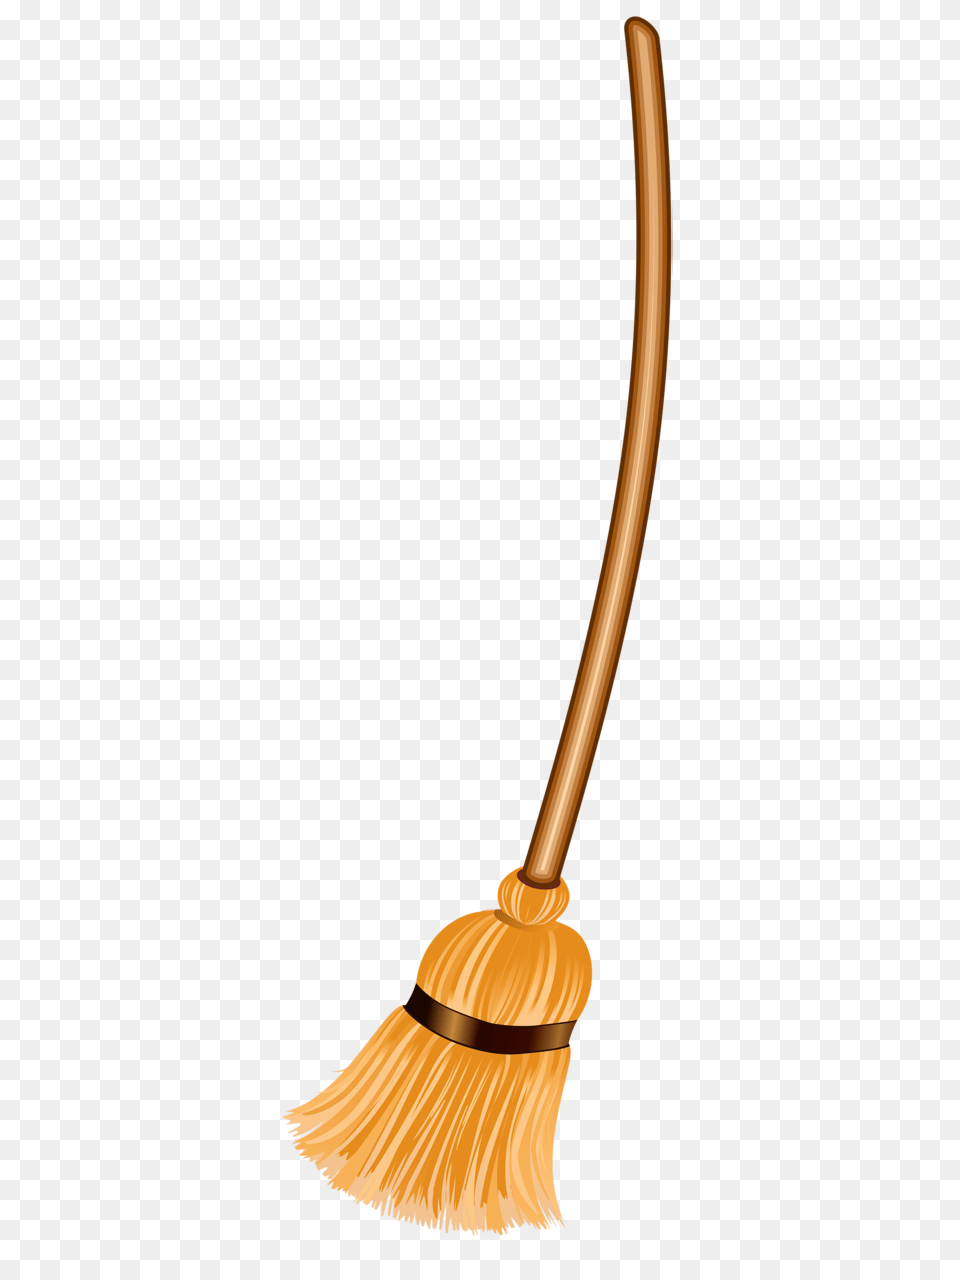 Popular And Trending Broomstick Stickers, Broom, Smoke Pipe Free Png